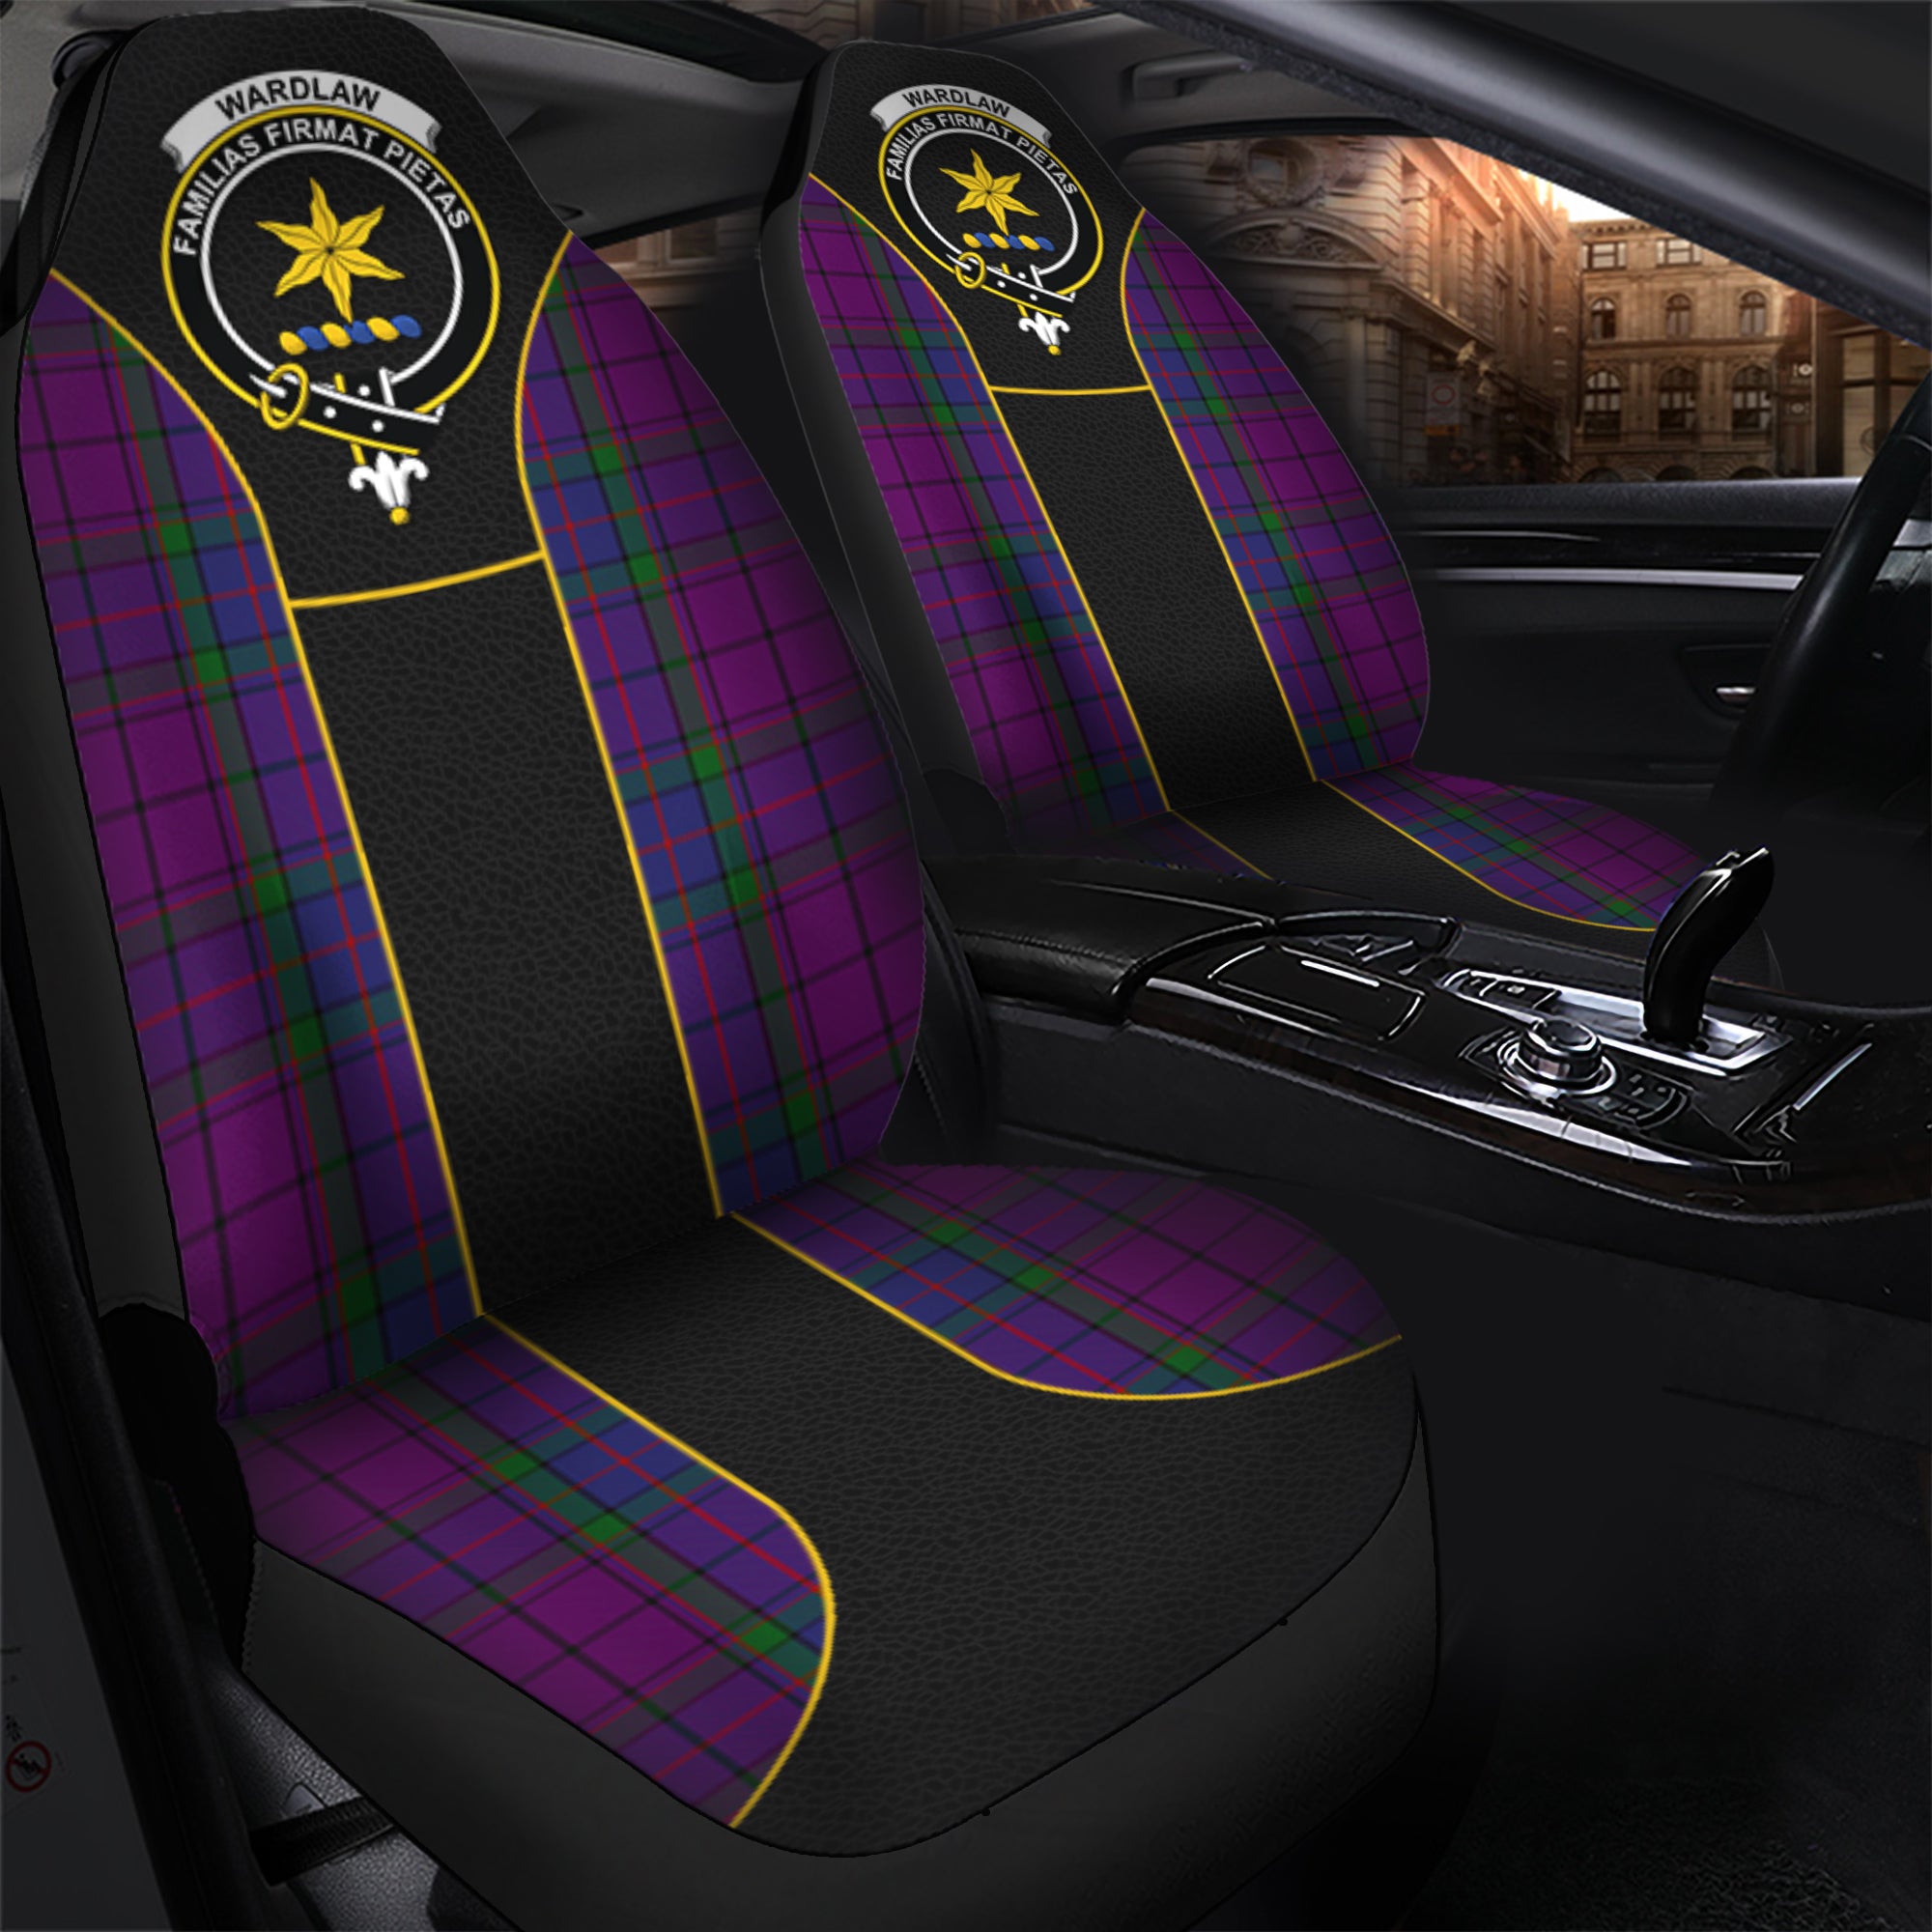 scottish-wardlaw-tartan-crest-car-seat-cover-special-style